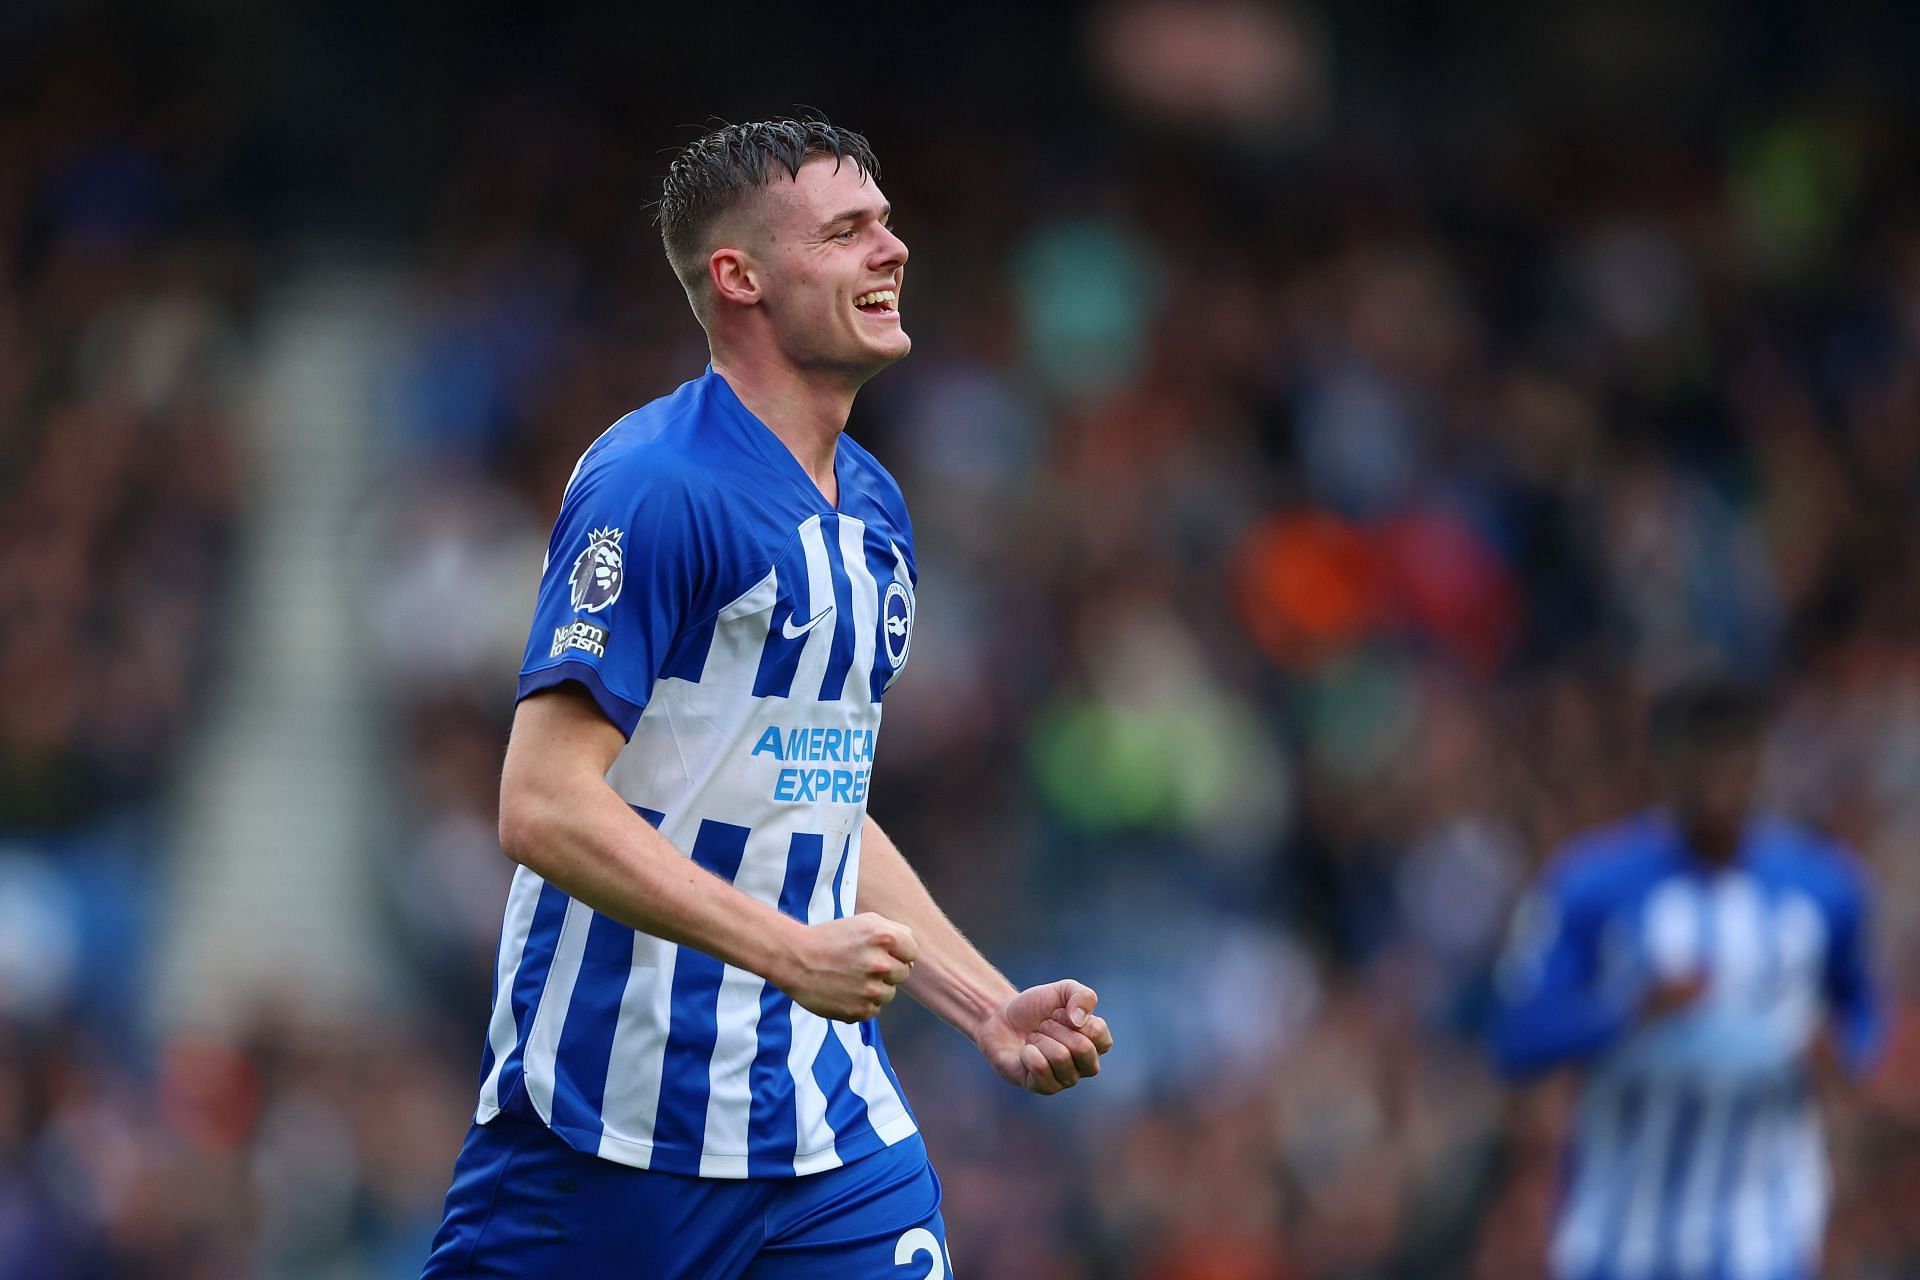 Evan Ferguson looks set for a move away from Brighton, with several interested clubs